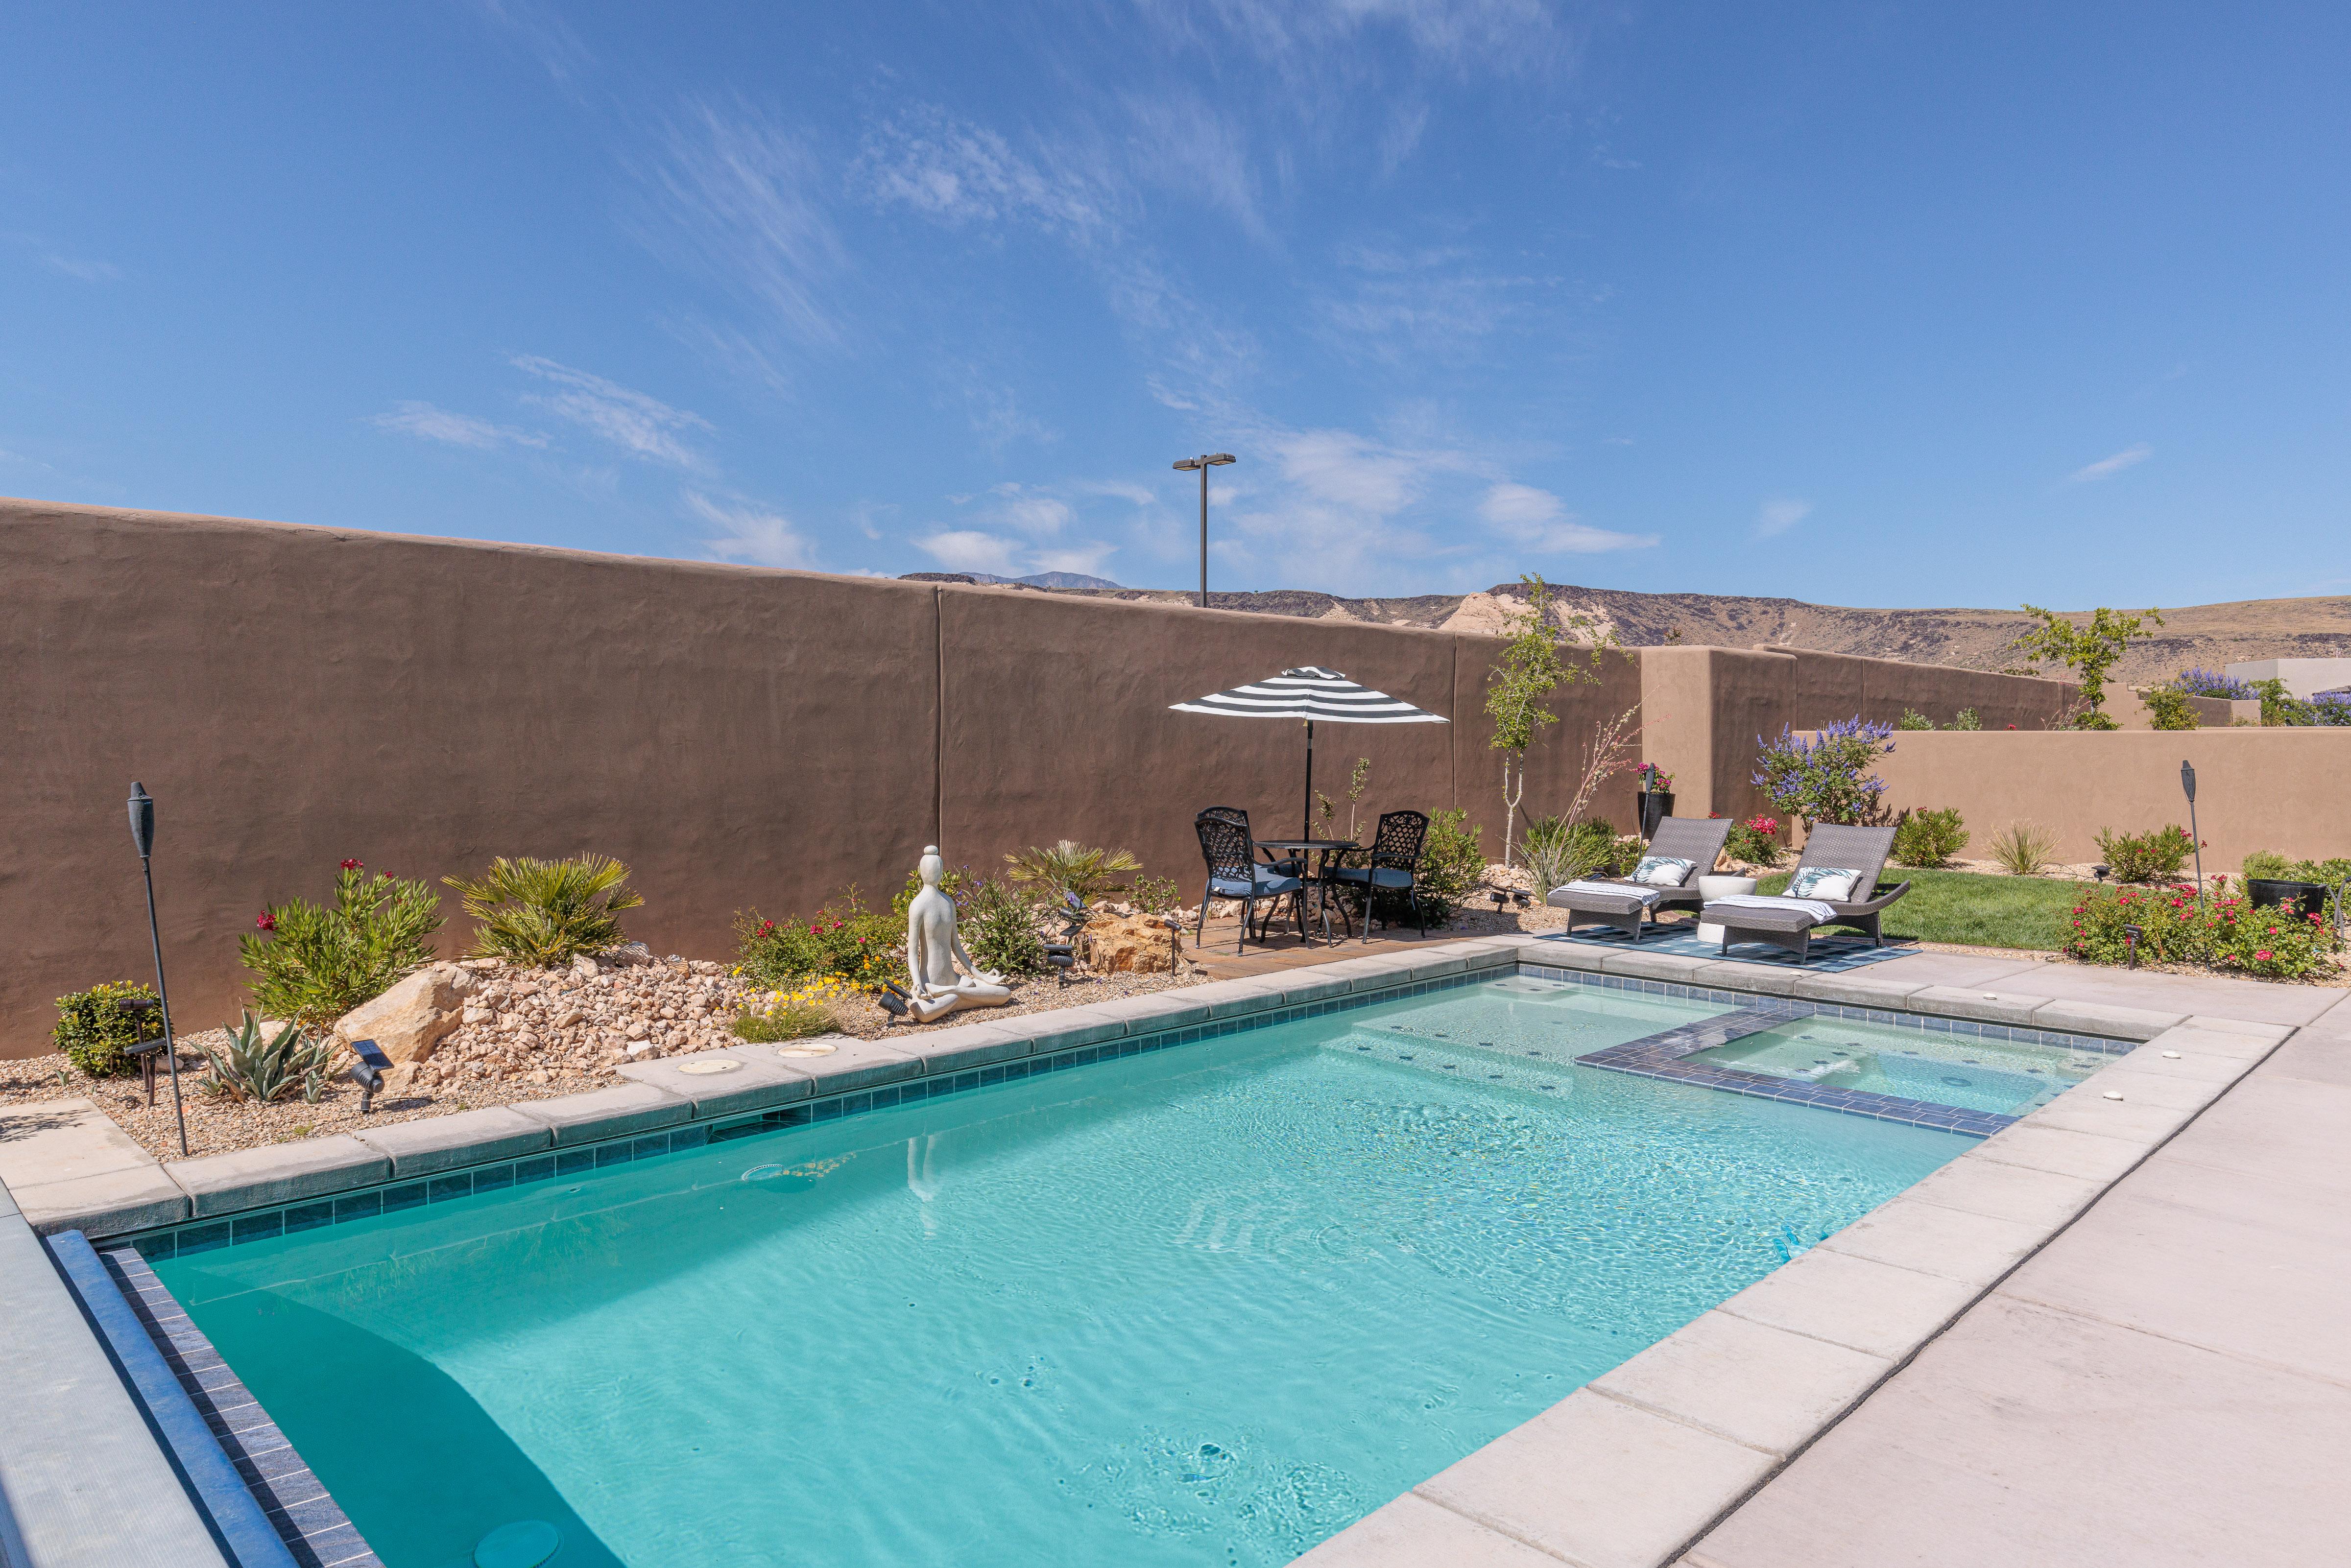 The private pool is the perfect place to cool down. When you are done for the day you have the option to turn on the switch to cover the pool. 